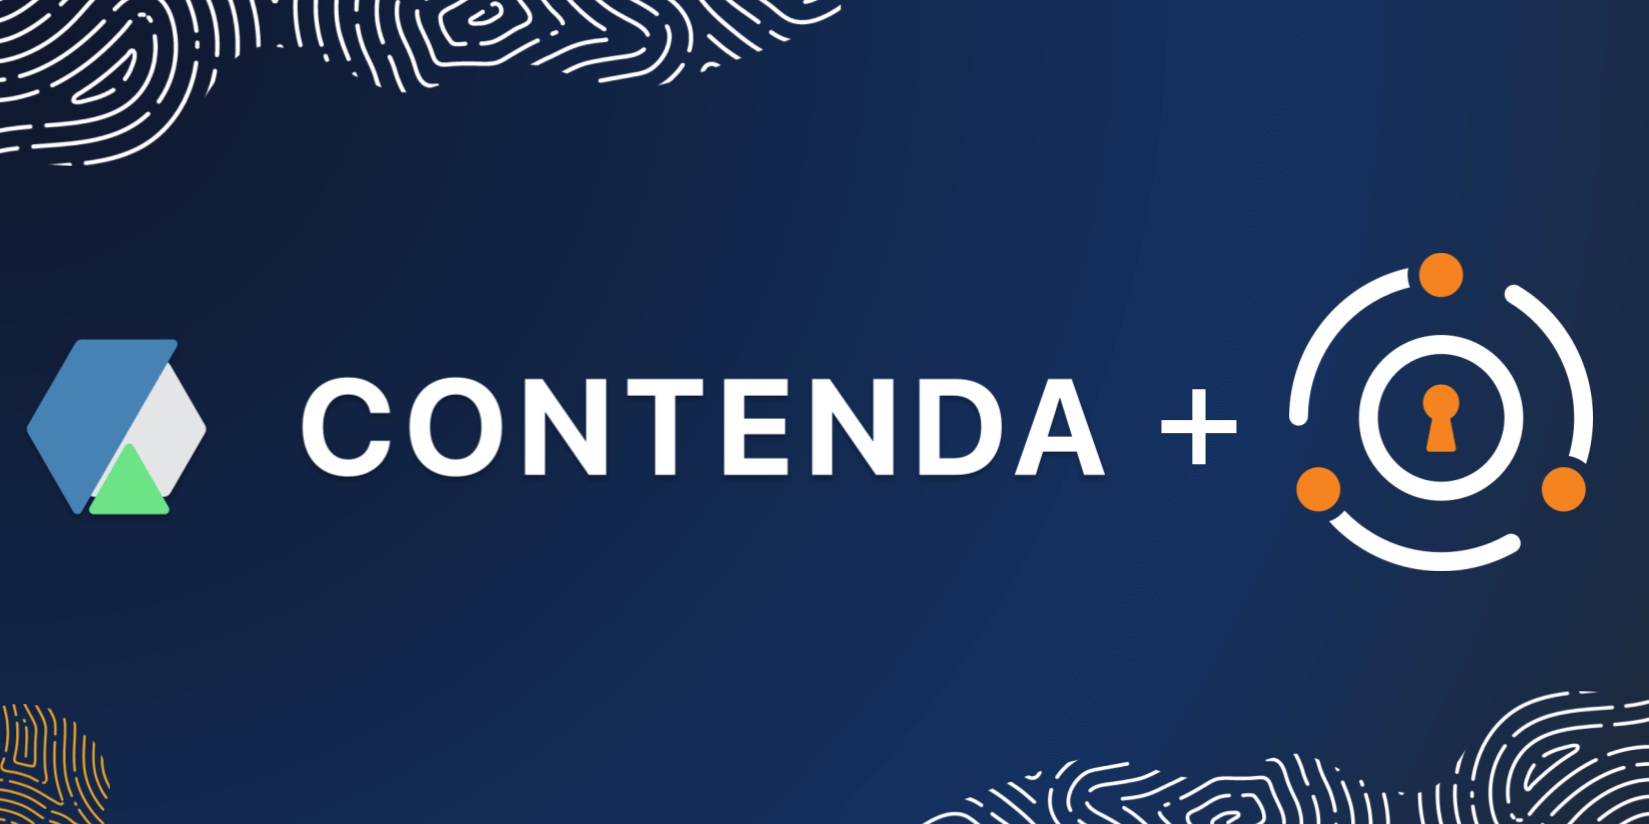 How Contenda saved 'a lot' of time with FusionAuth